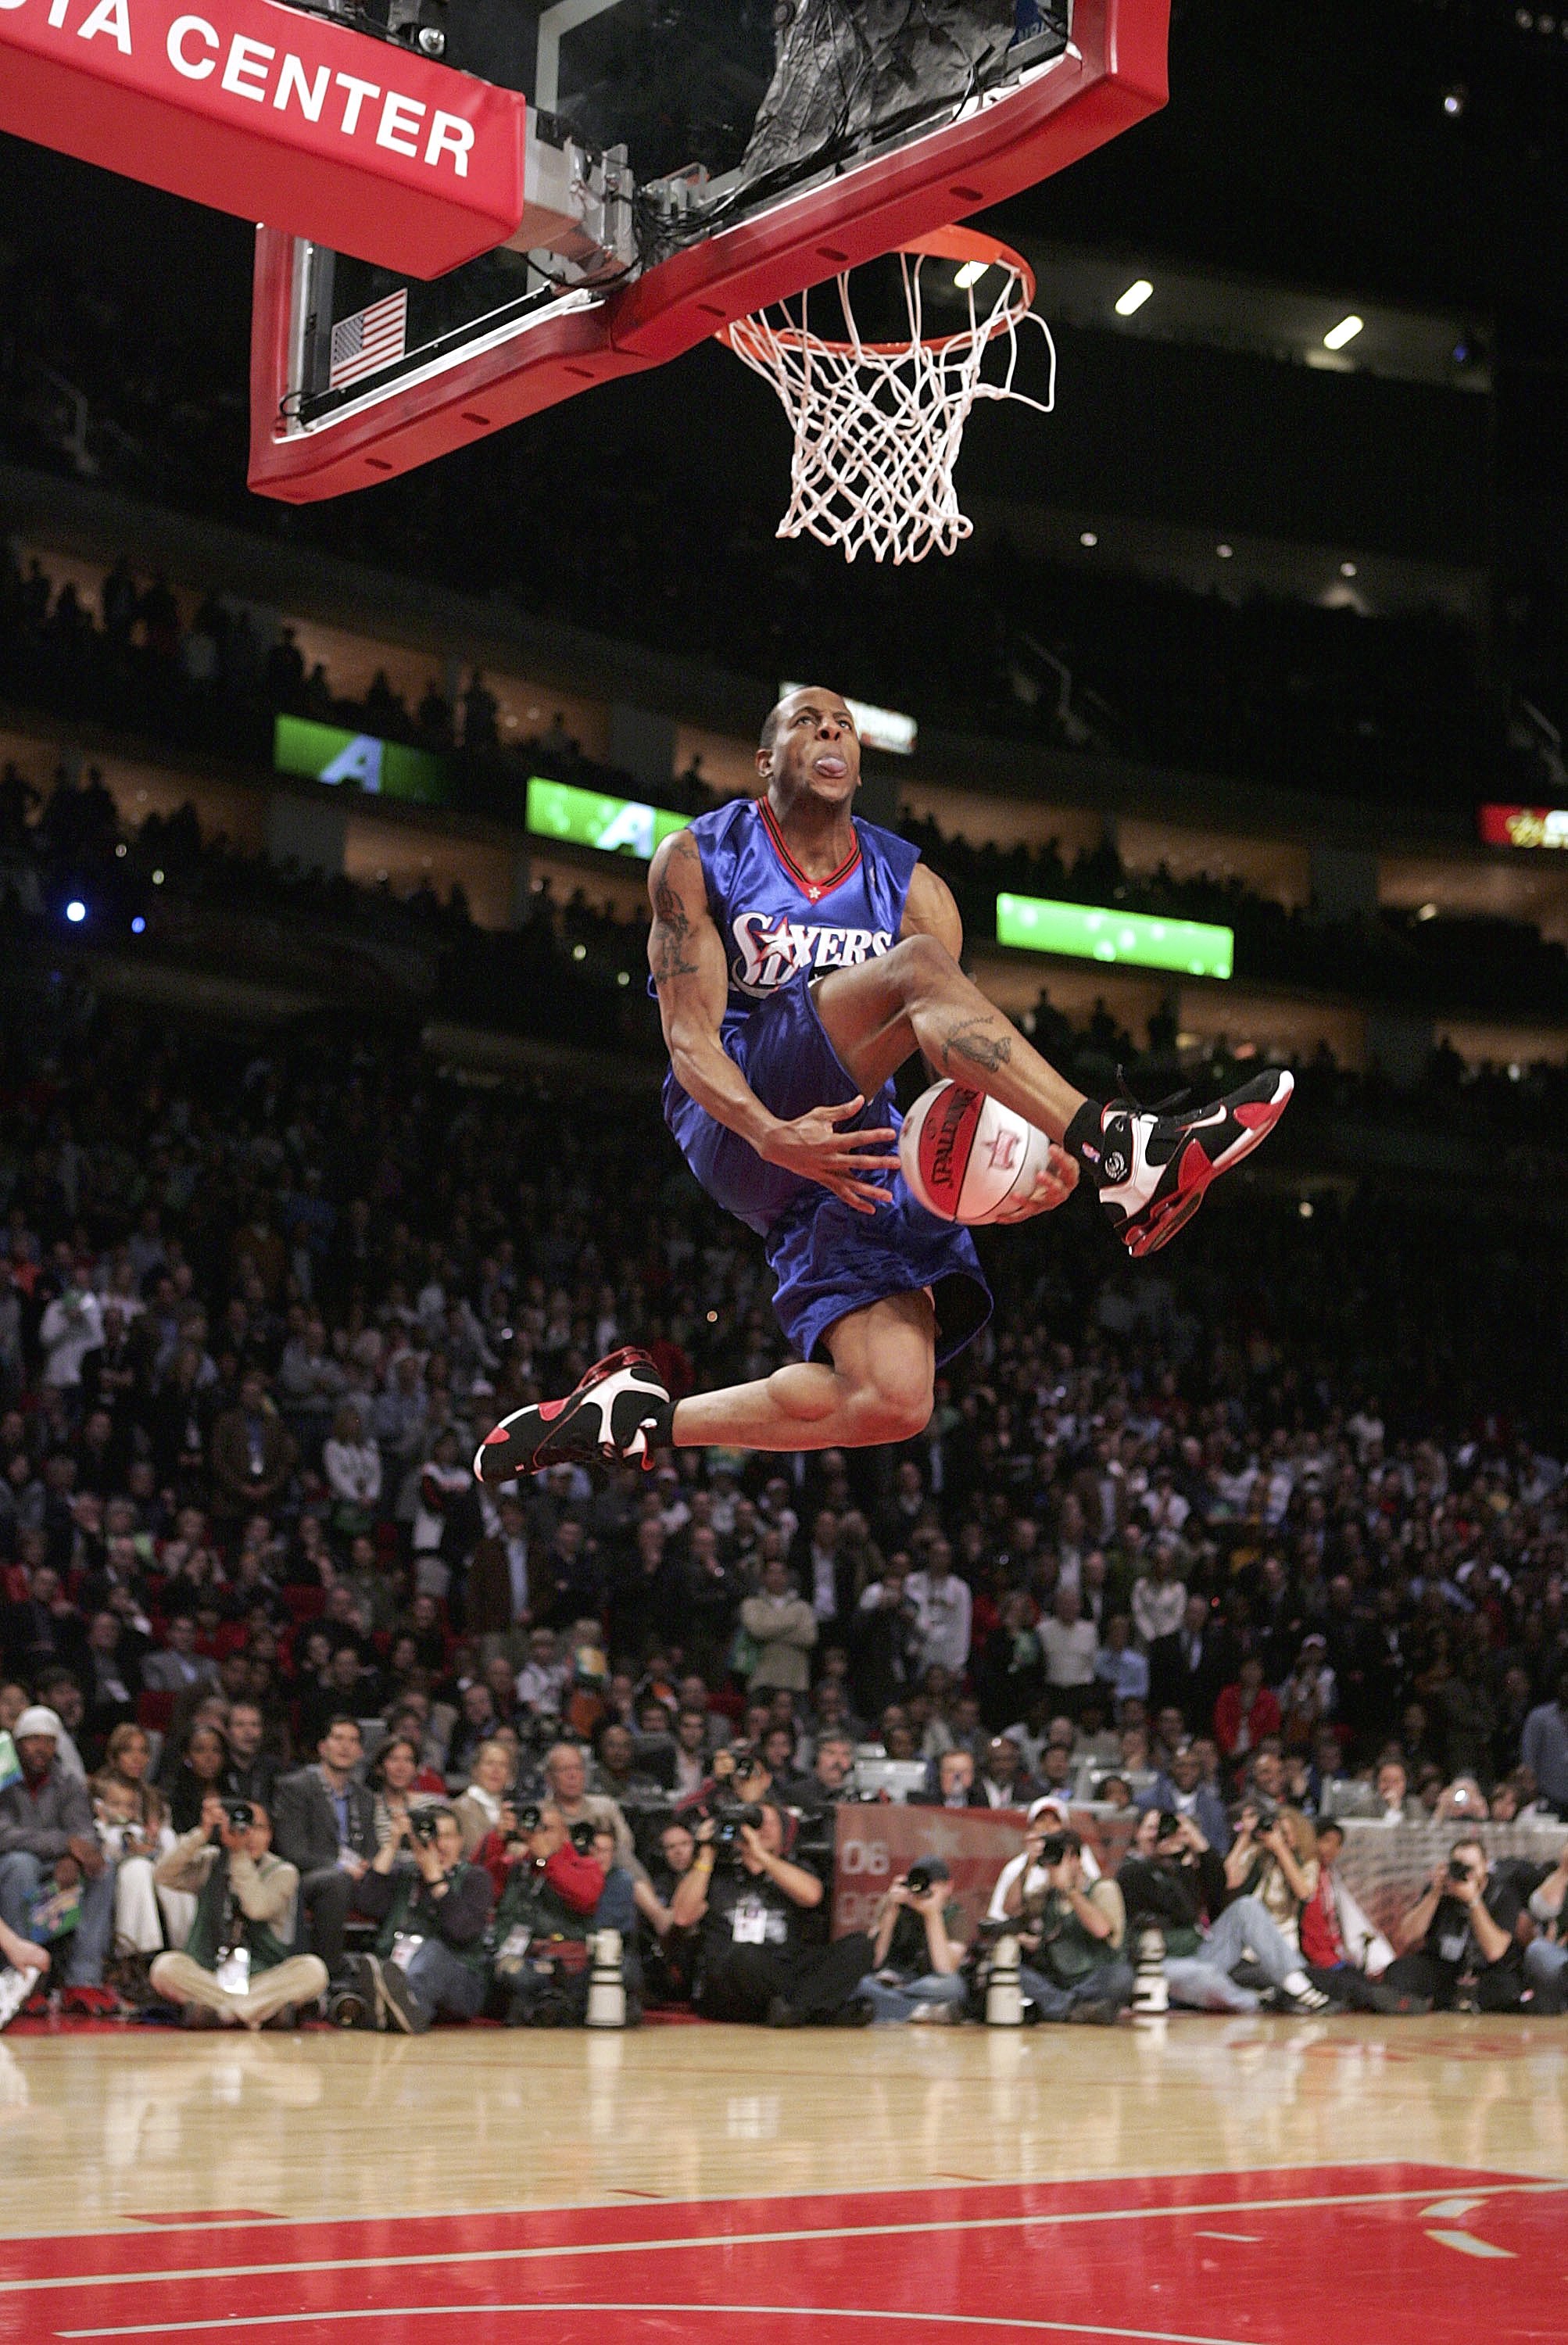 HOUSTON - FEBRUARY 18:  Andre Iguodala #9 of the Philadelphia 76ers moves the ball between his legs in the Sprite Rising Stars Slam Dunk competition during NBA All-Star Weekend at the Toyota Center on February 18, 2006 in Houston, Texas.  NOTE TO USER: Us